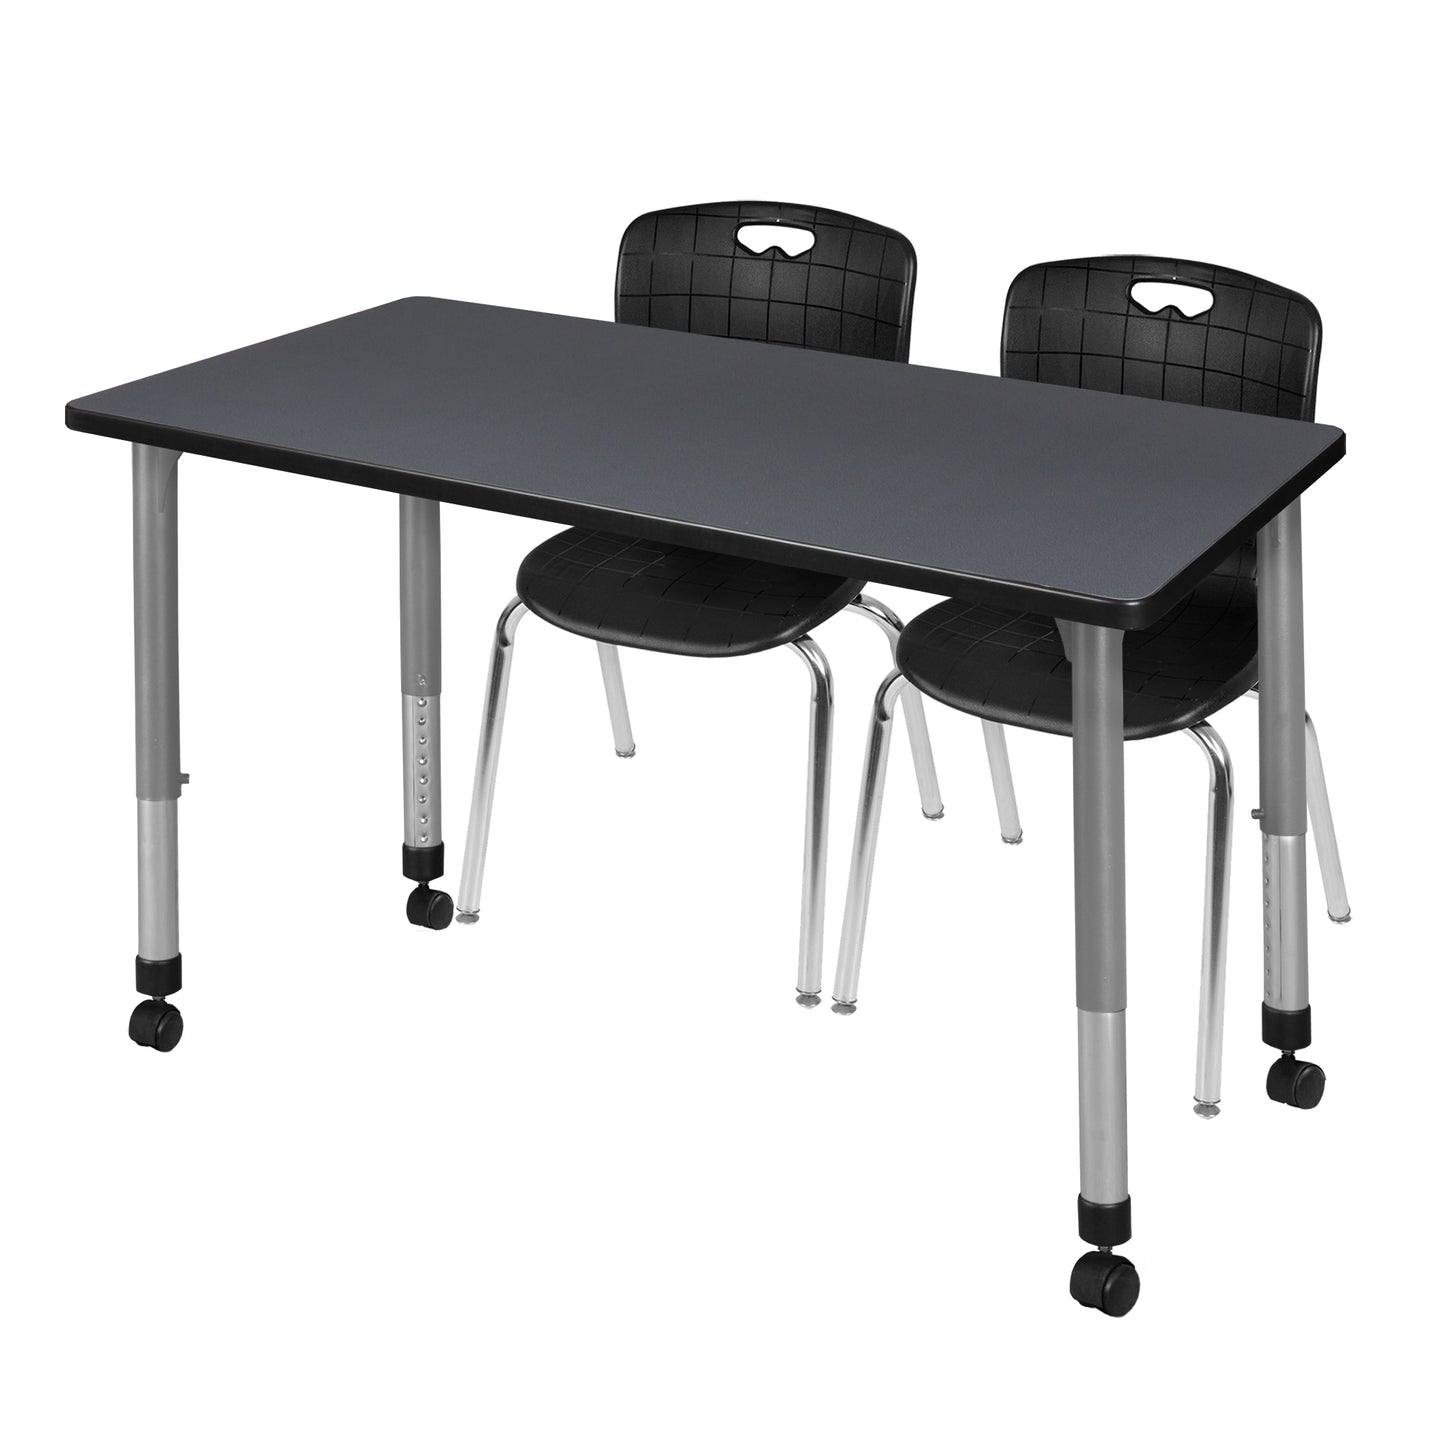 Regency Kee 48 x 30 in. Adjustable Classroom Table & 2 Andy 18 in. Stack Chairs